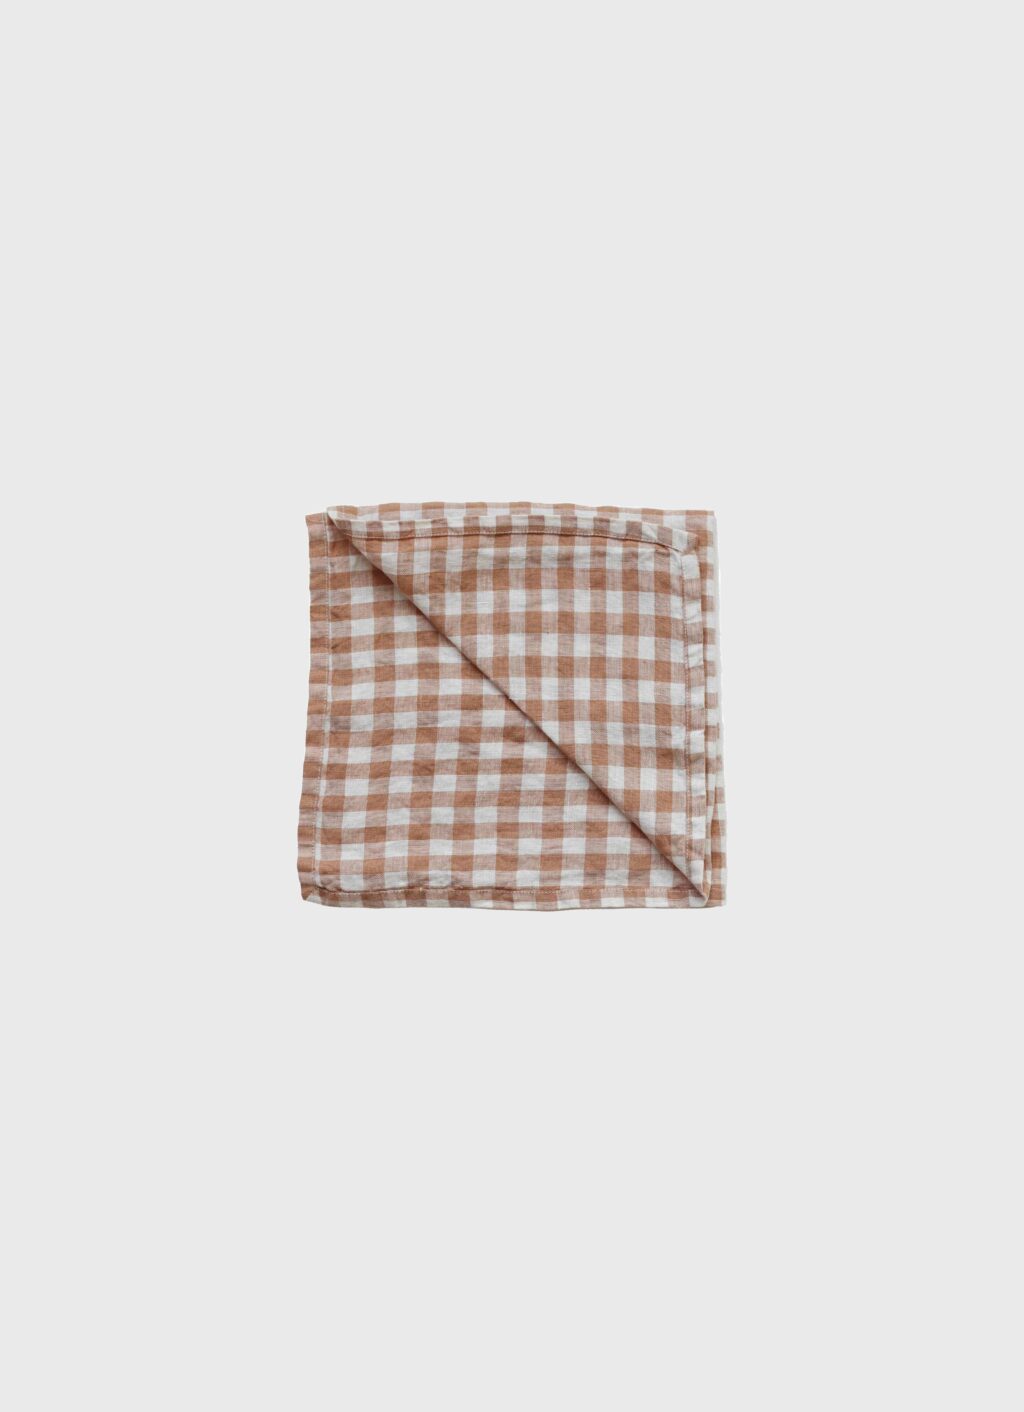 Tell Me More - Napkin - Linen - Gingham Biscuit - 45x45cm